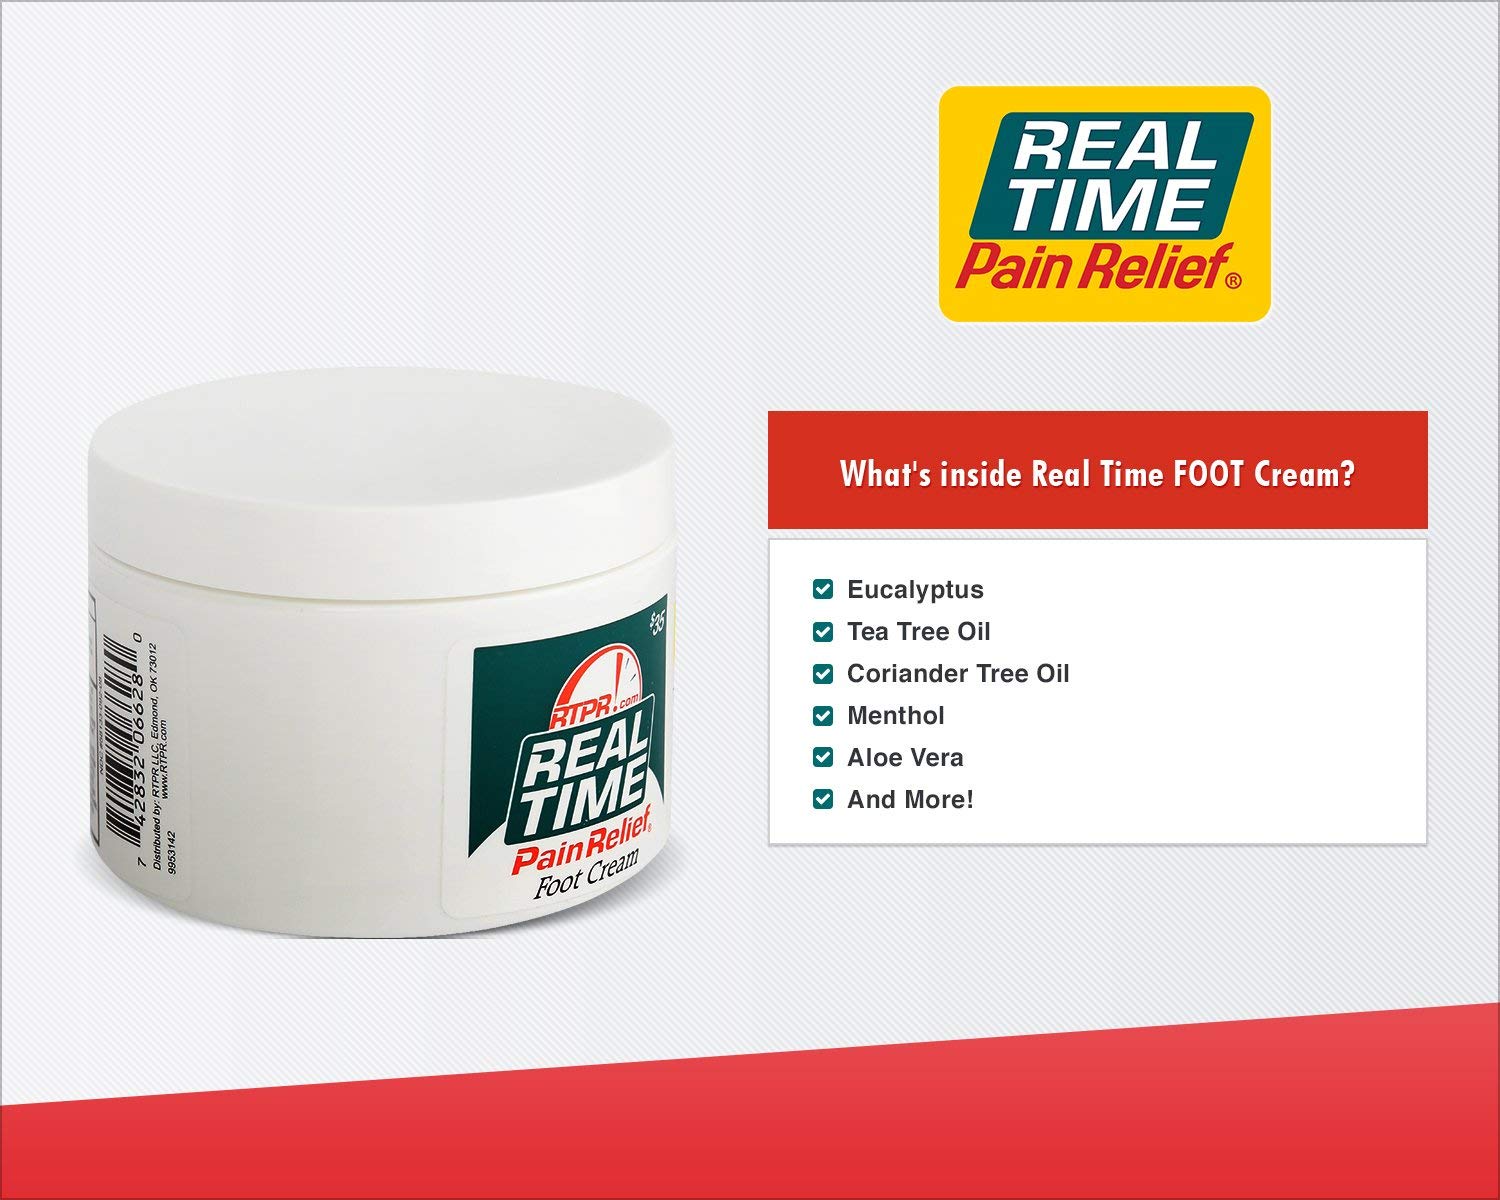 Real Time Pain Relief - Foot Cream 7